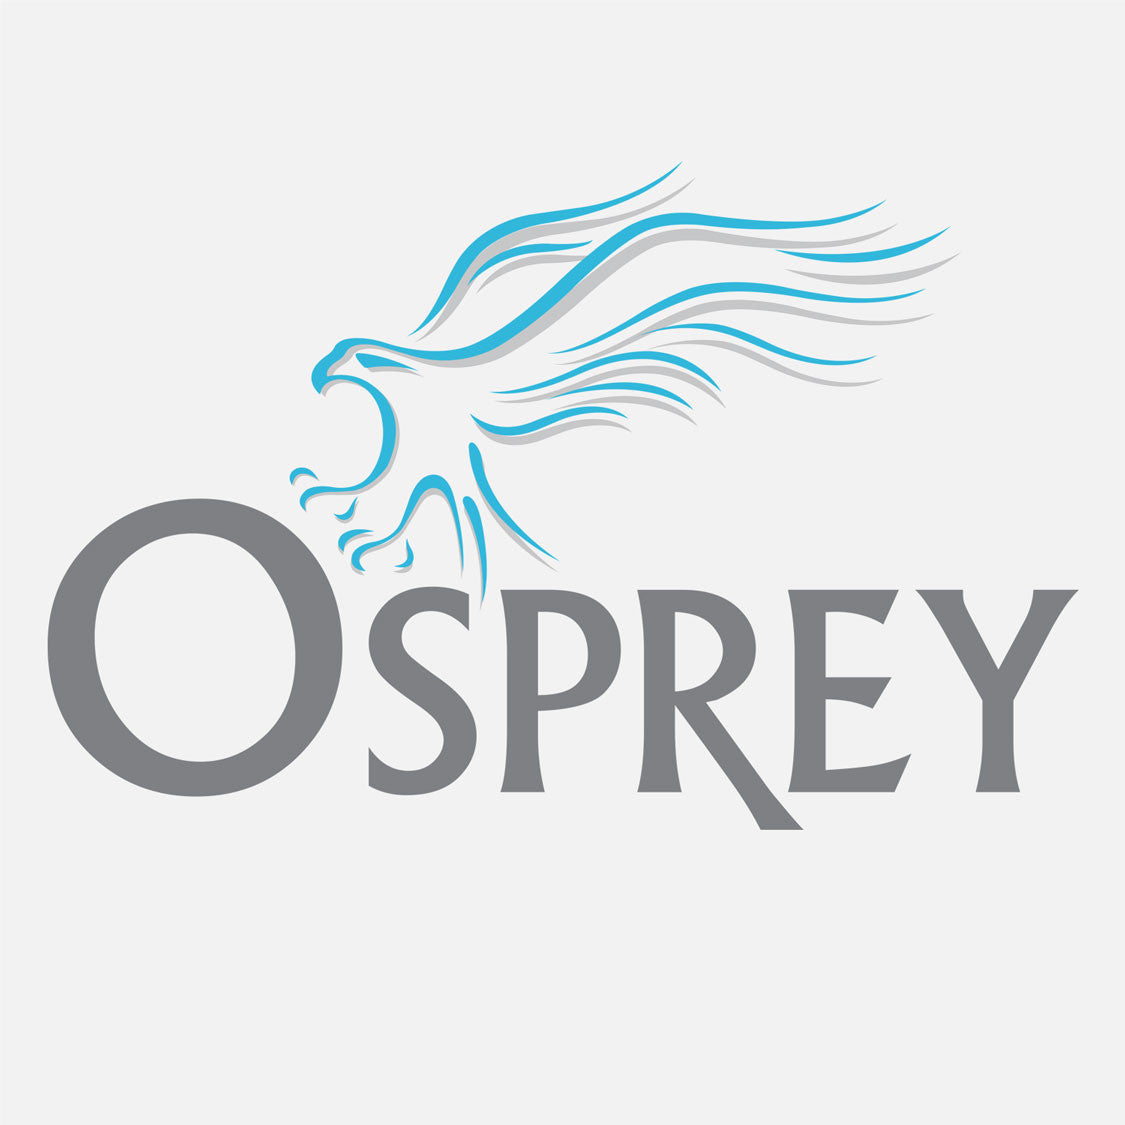 Osprey Health facilitates clinic services to achieve efficient use of resources. The logo is a graphical depiction of an osprey.